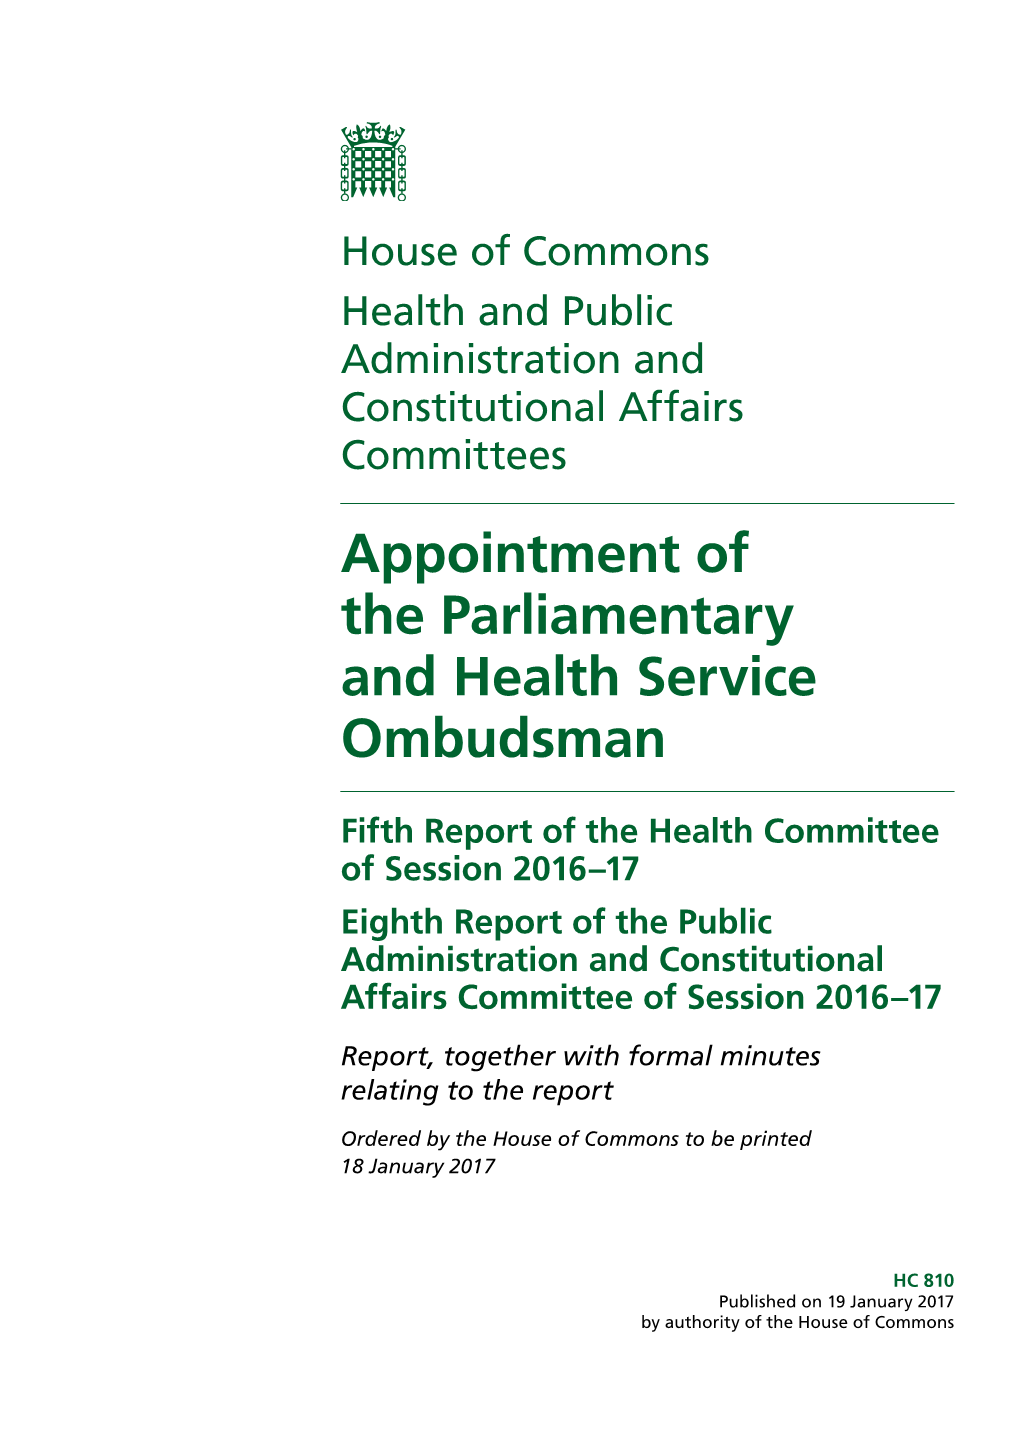 Appointment of the Parliamentary and Health Service Ombudsman